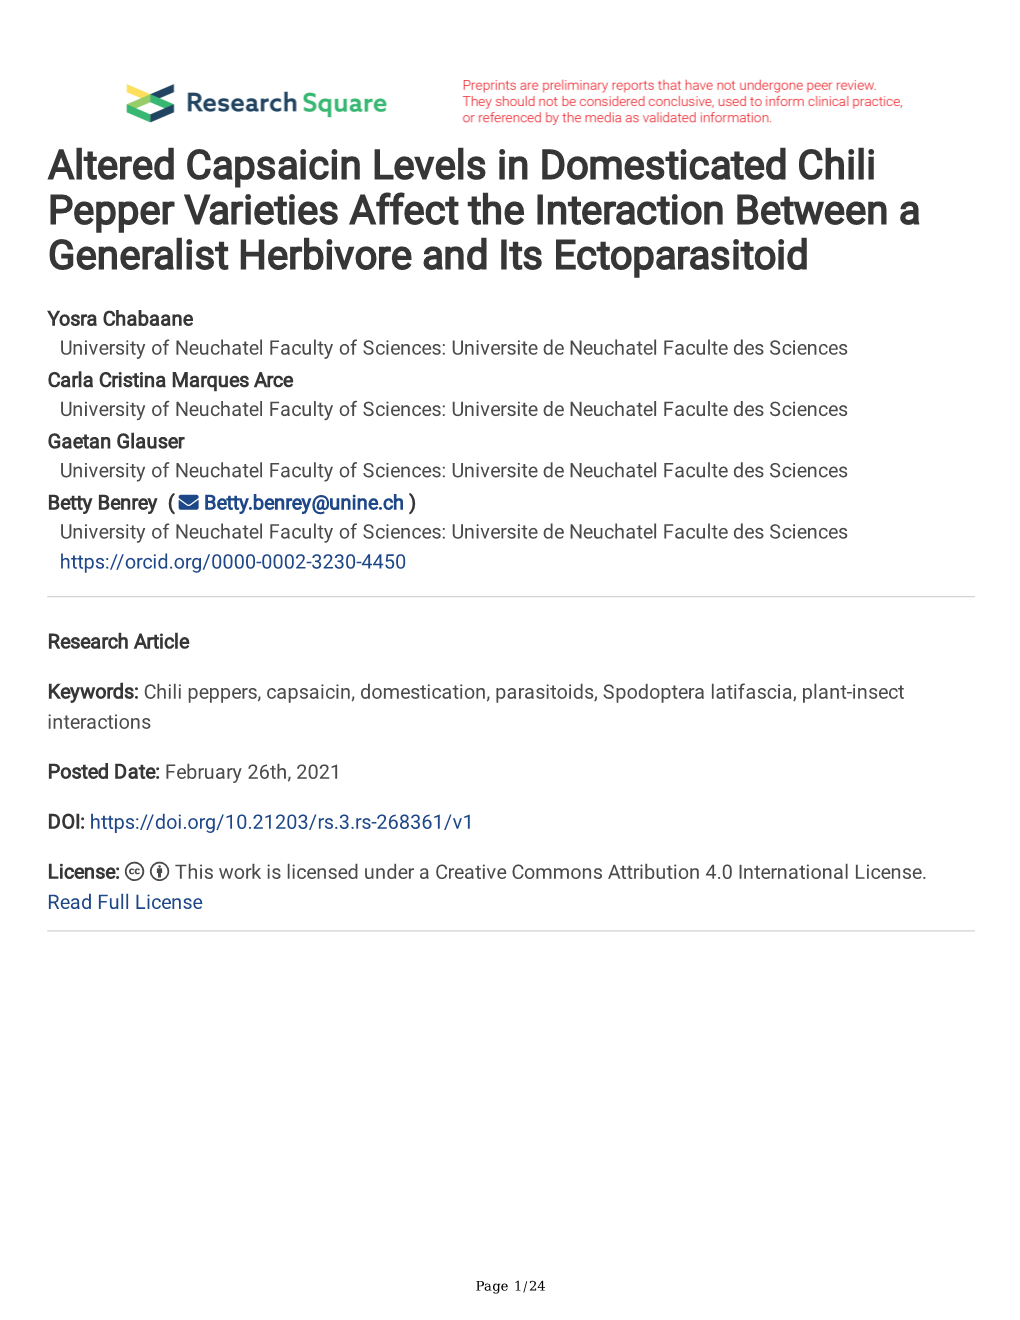 Altered Capsaicin Levels in Domesticated Chili Pepper Varieties Affect the Interaction Between a Generalist Herbivore and Its Ectoparasitoid